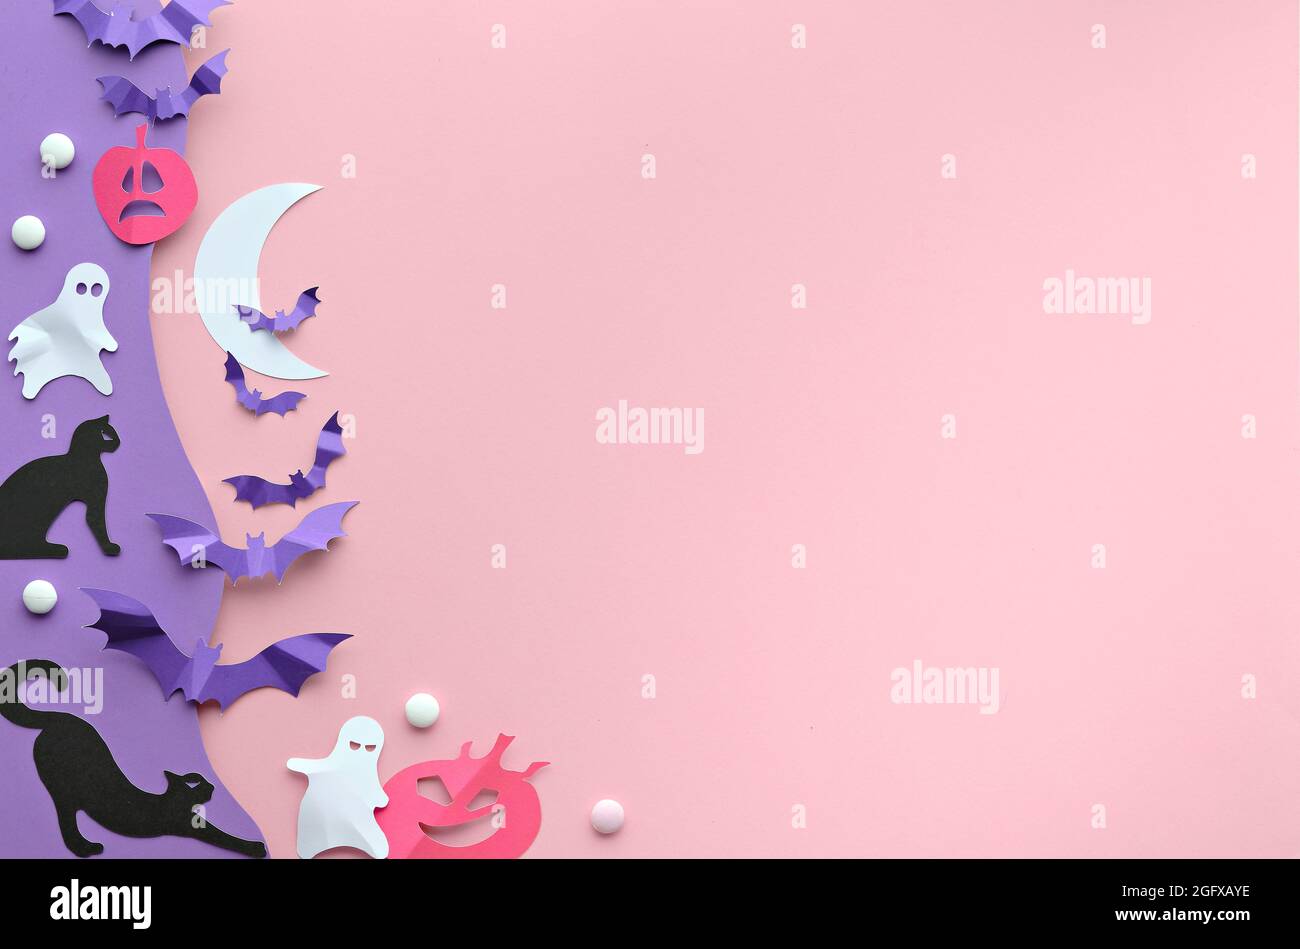 Cute Halloween background with kawaii black cats, vibrant purple paper bats, pink pumpkins, sugar sweets and funny white ghosts. Flat lay on pink and Stock Photo